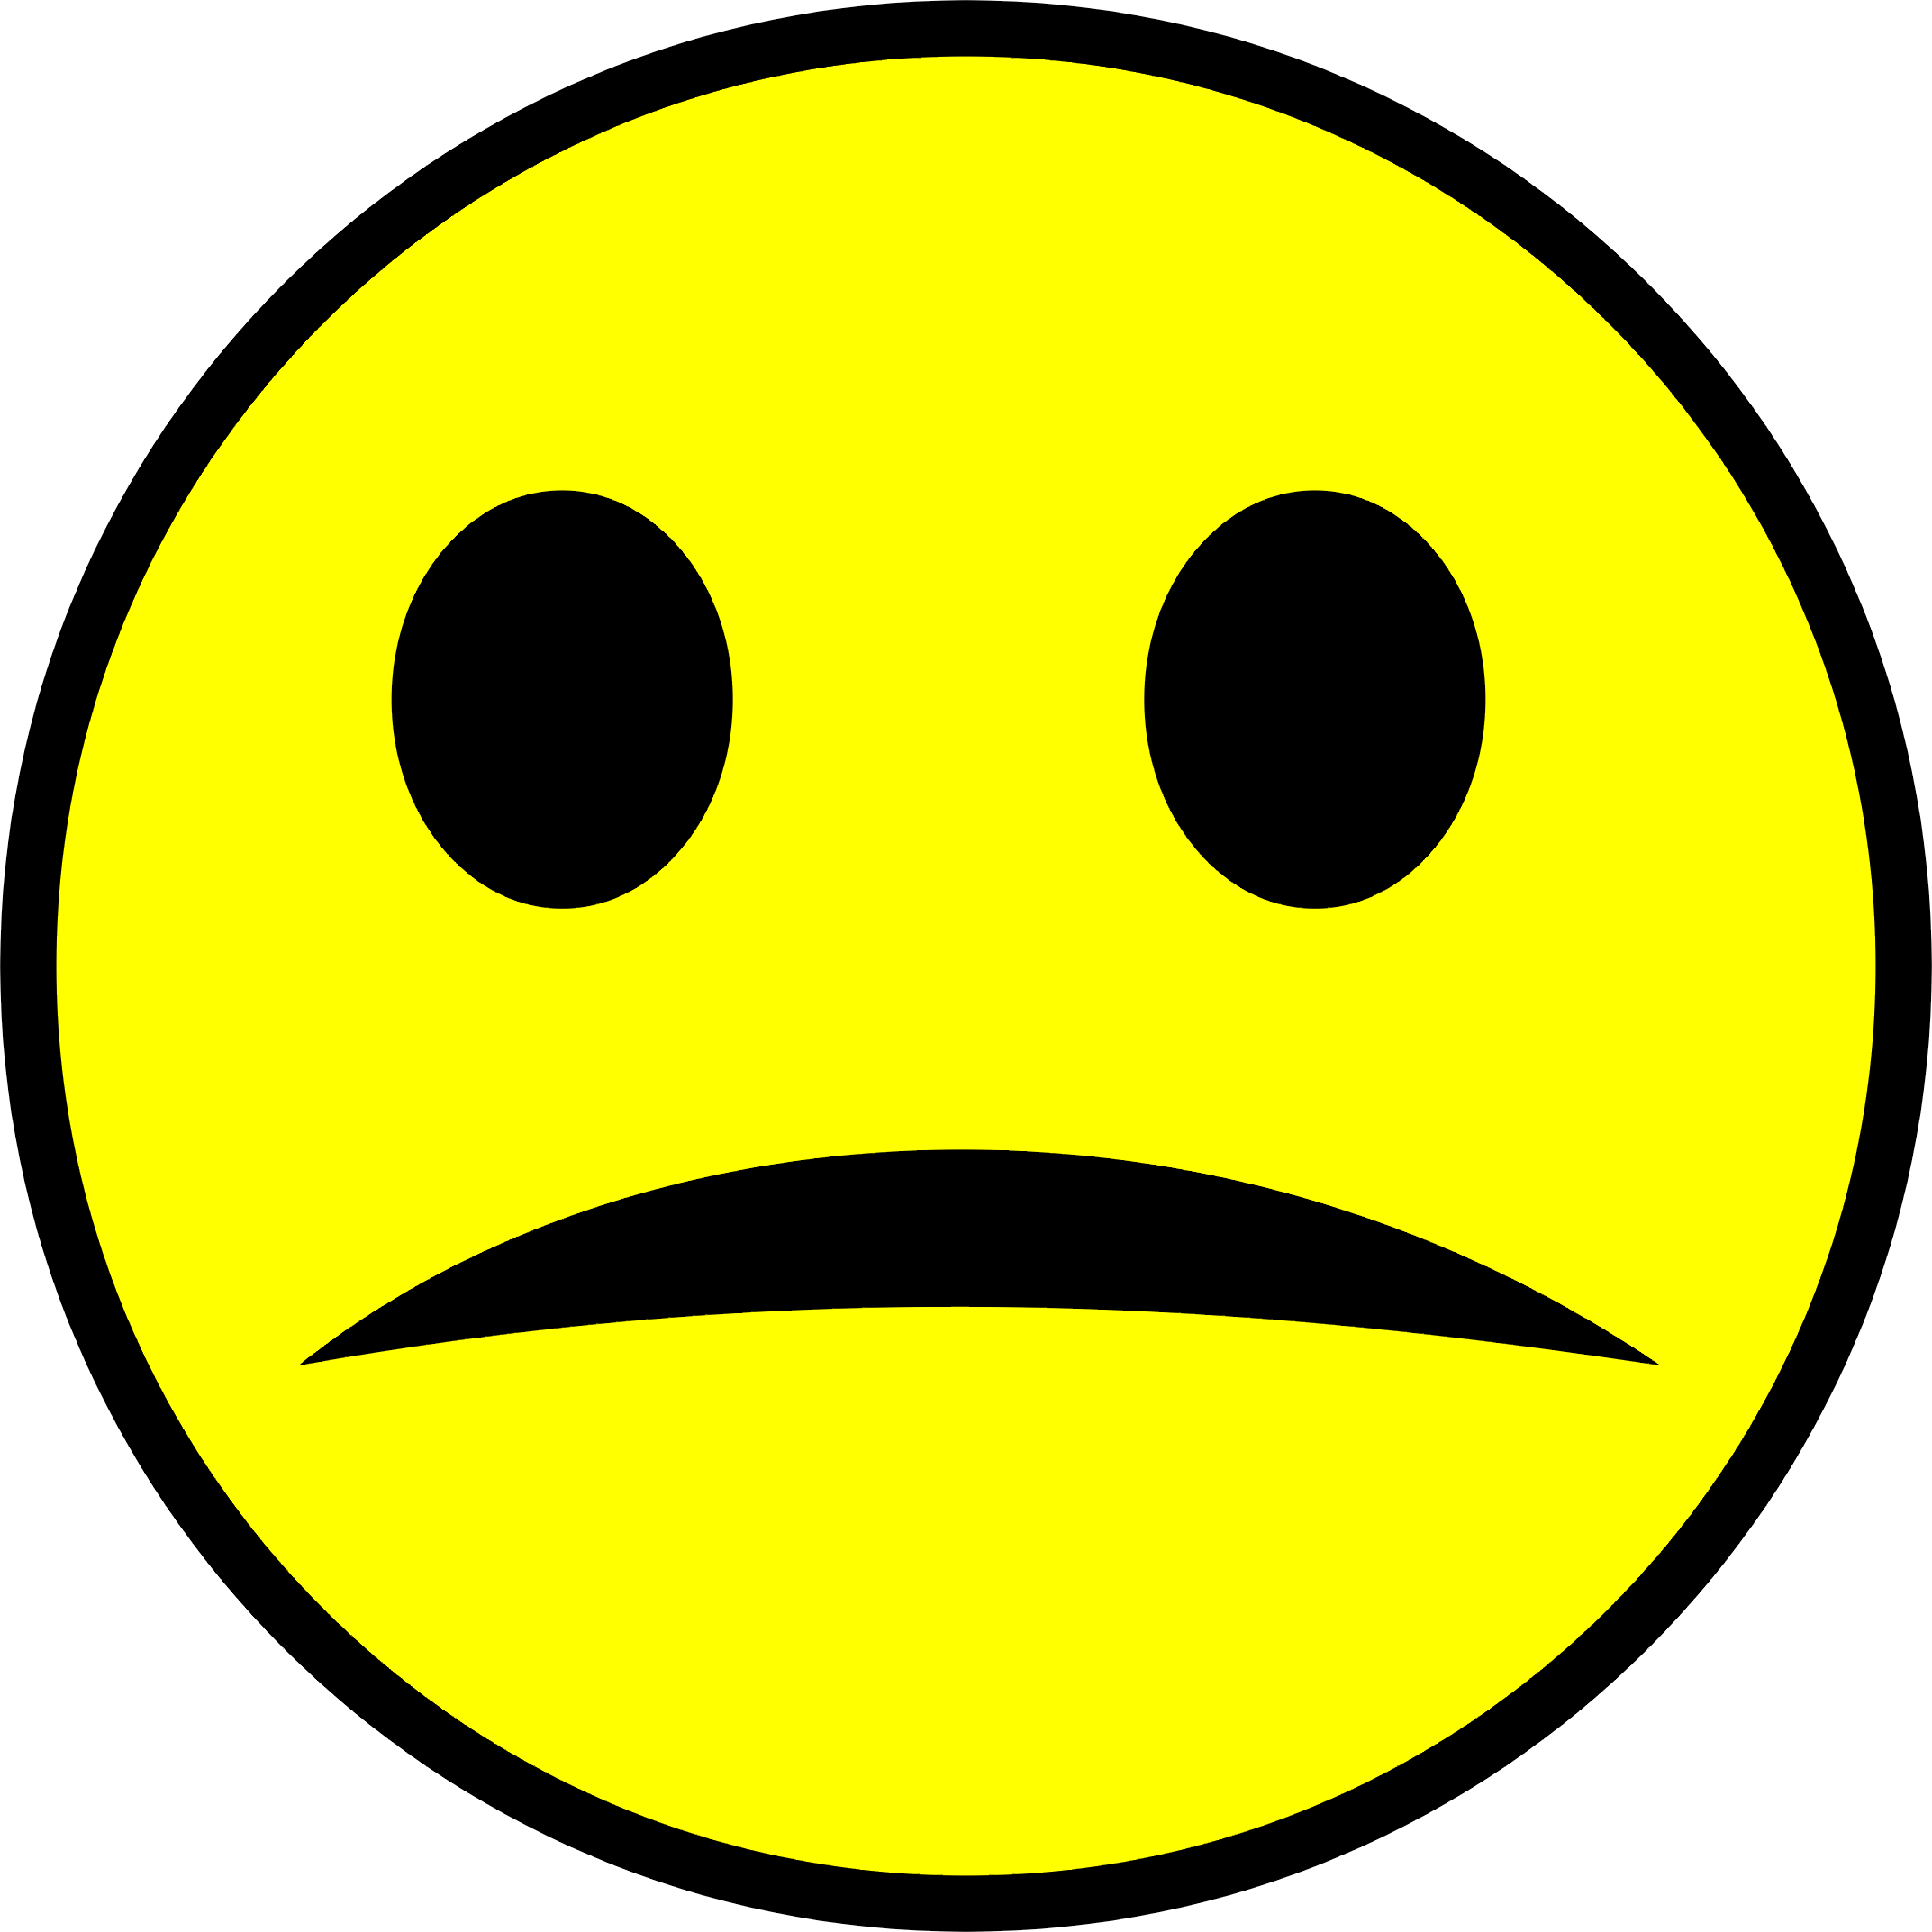 Smiley And Sad Faces Clip Art - ClipArt Best